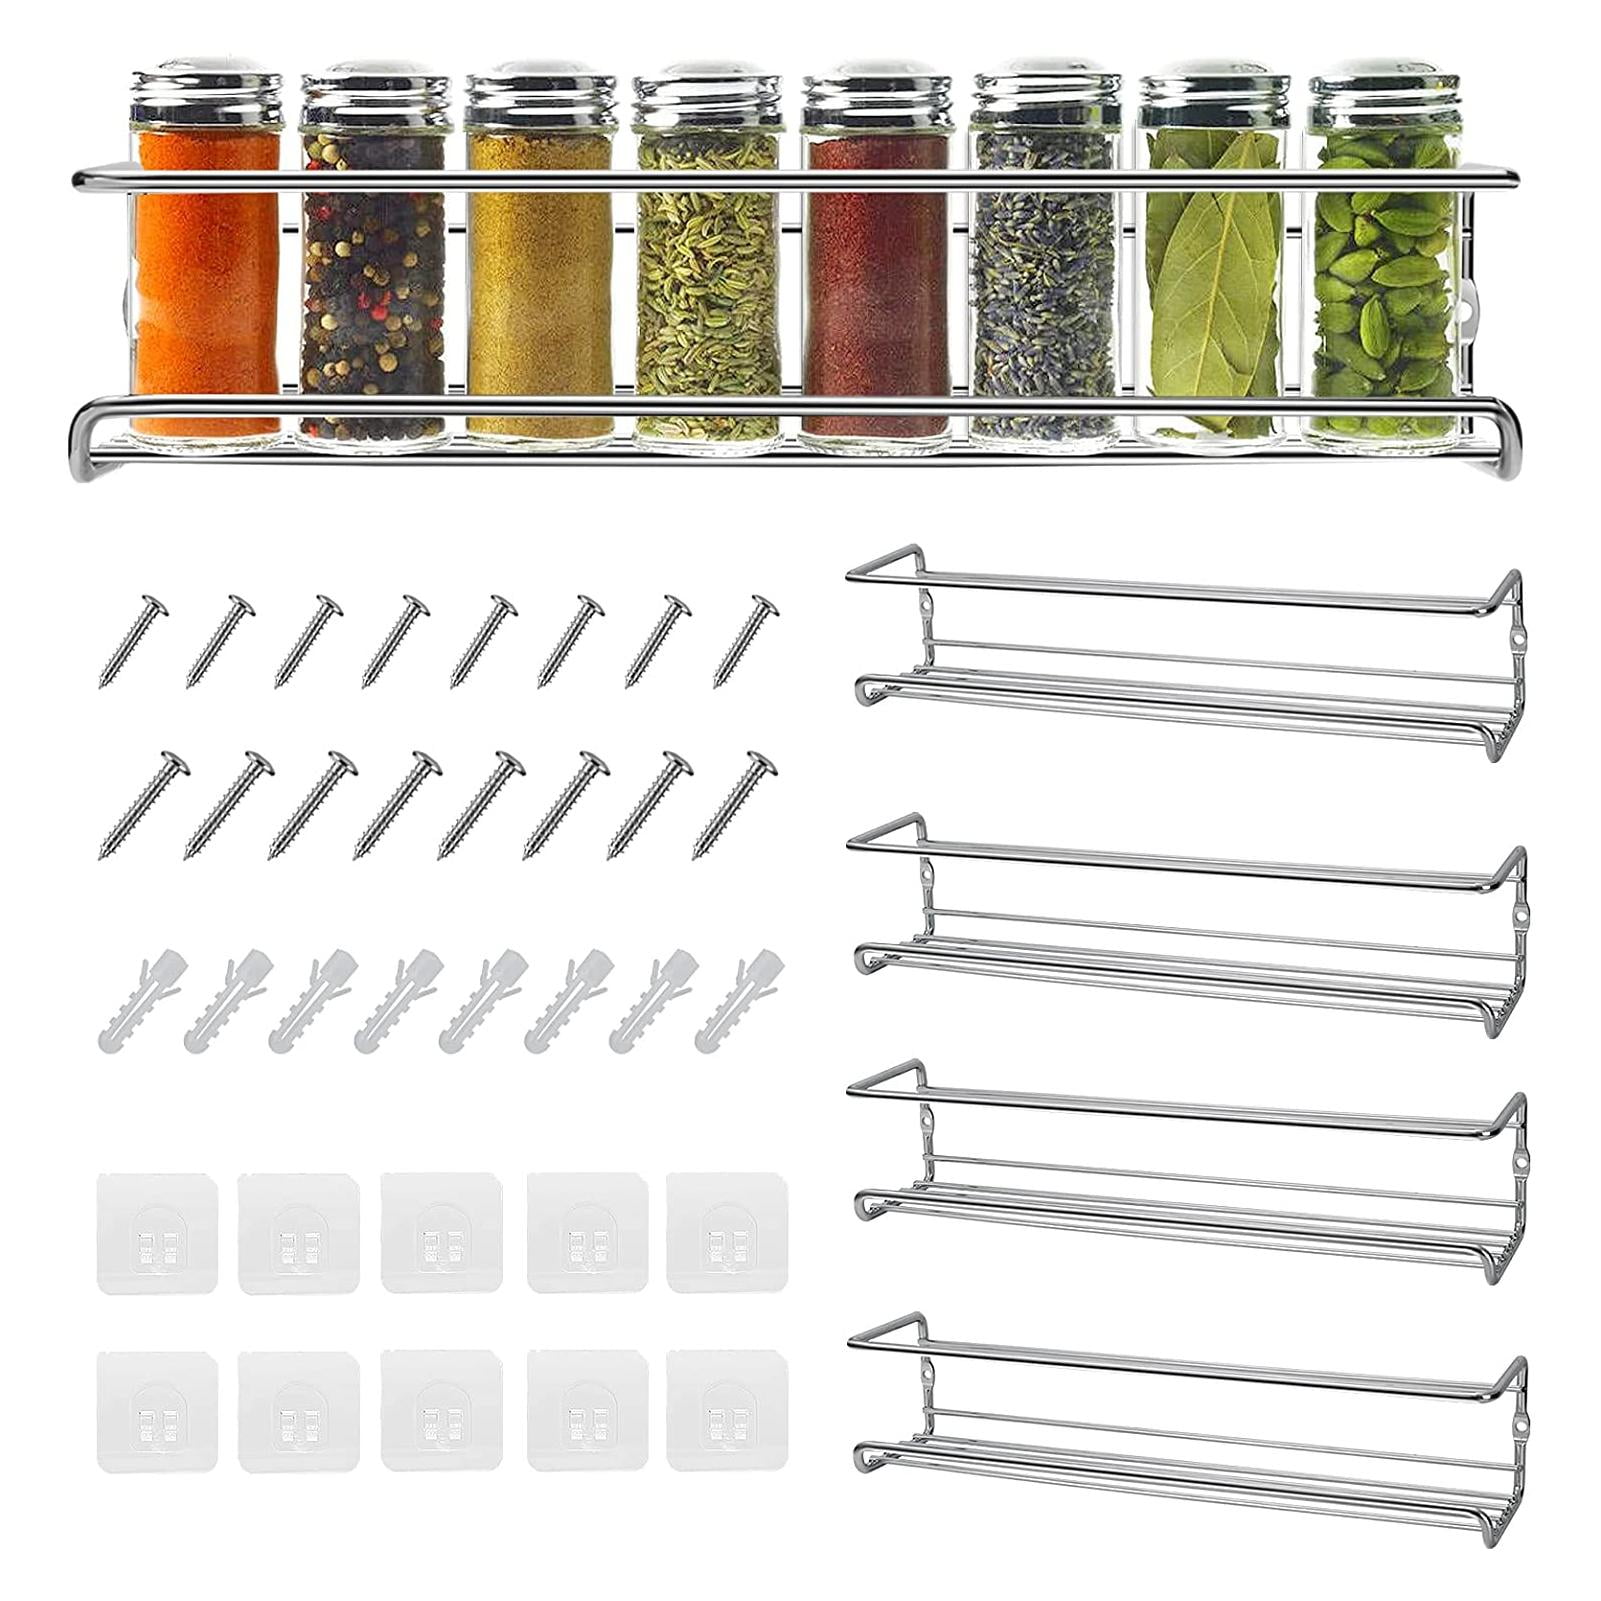 Details about   3/4Pcs/Set Stainless Steel Spice Jars Seasoning Rack Spices Container Bowl+Spoon 